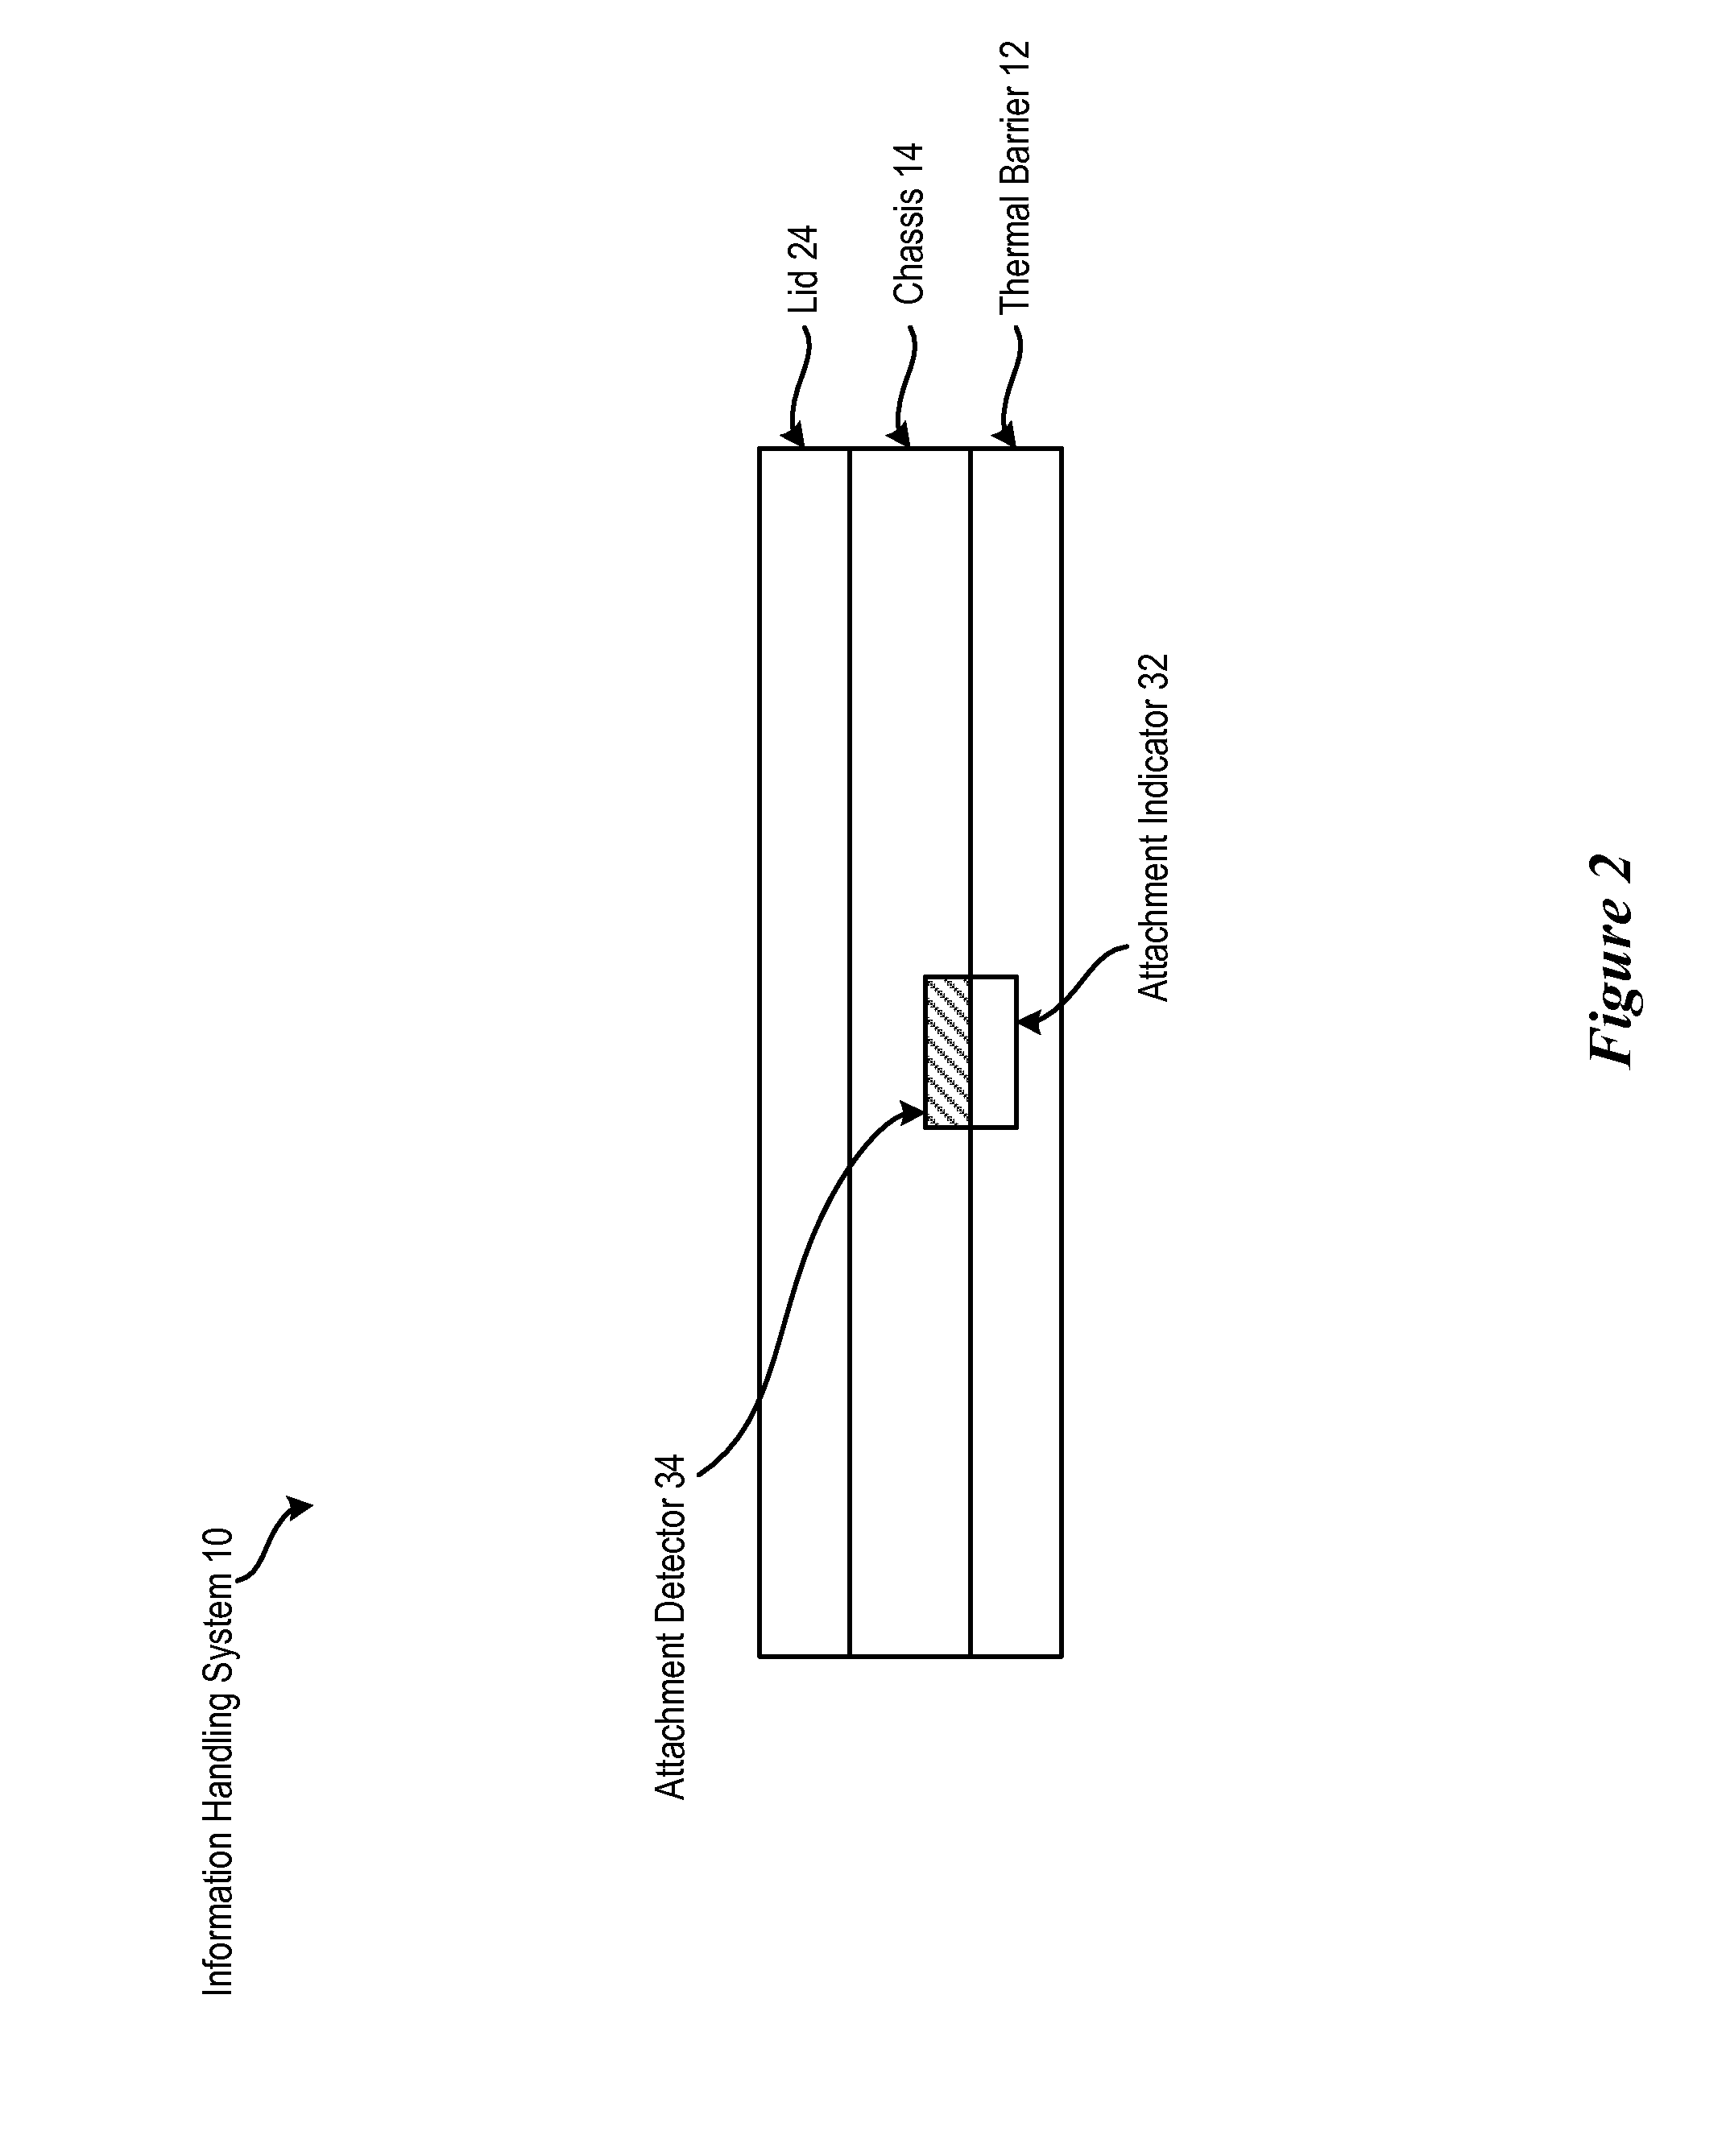 System and Method for Portable Information Handling System Parallel-Wall Thermal Shield